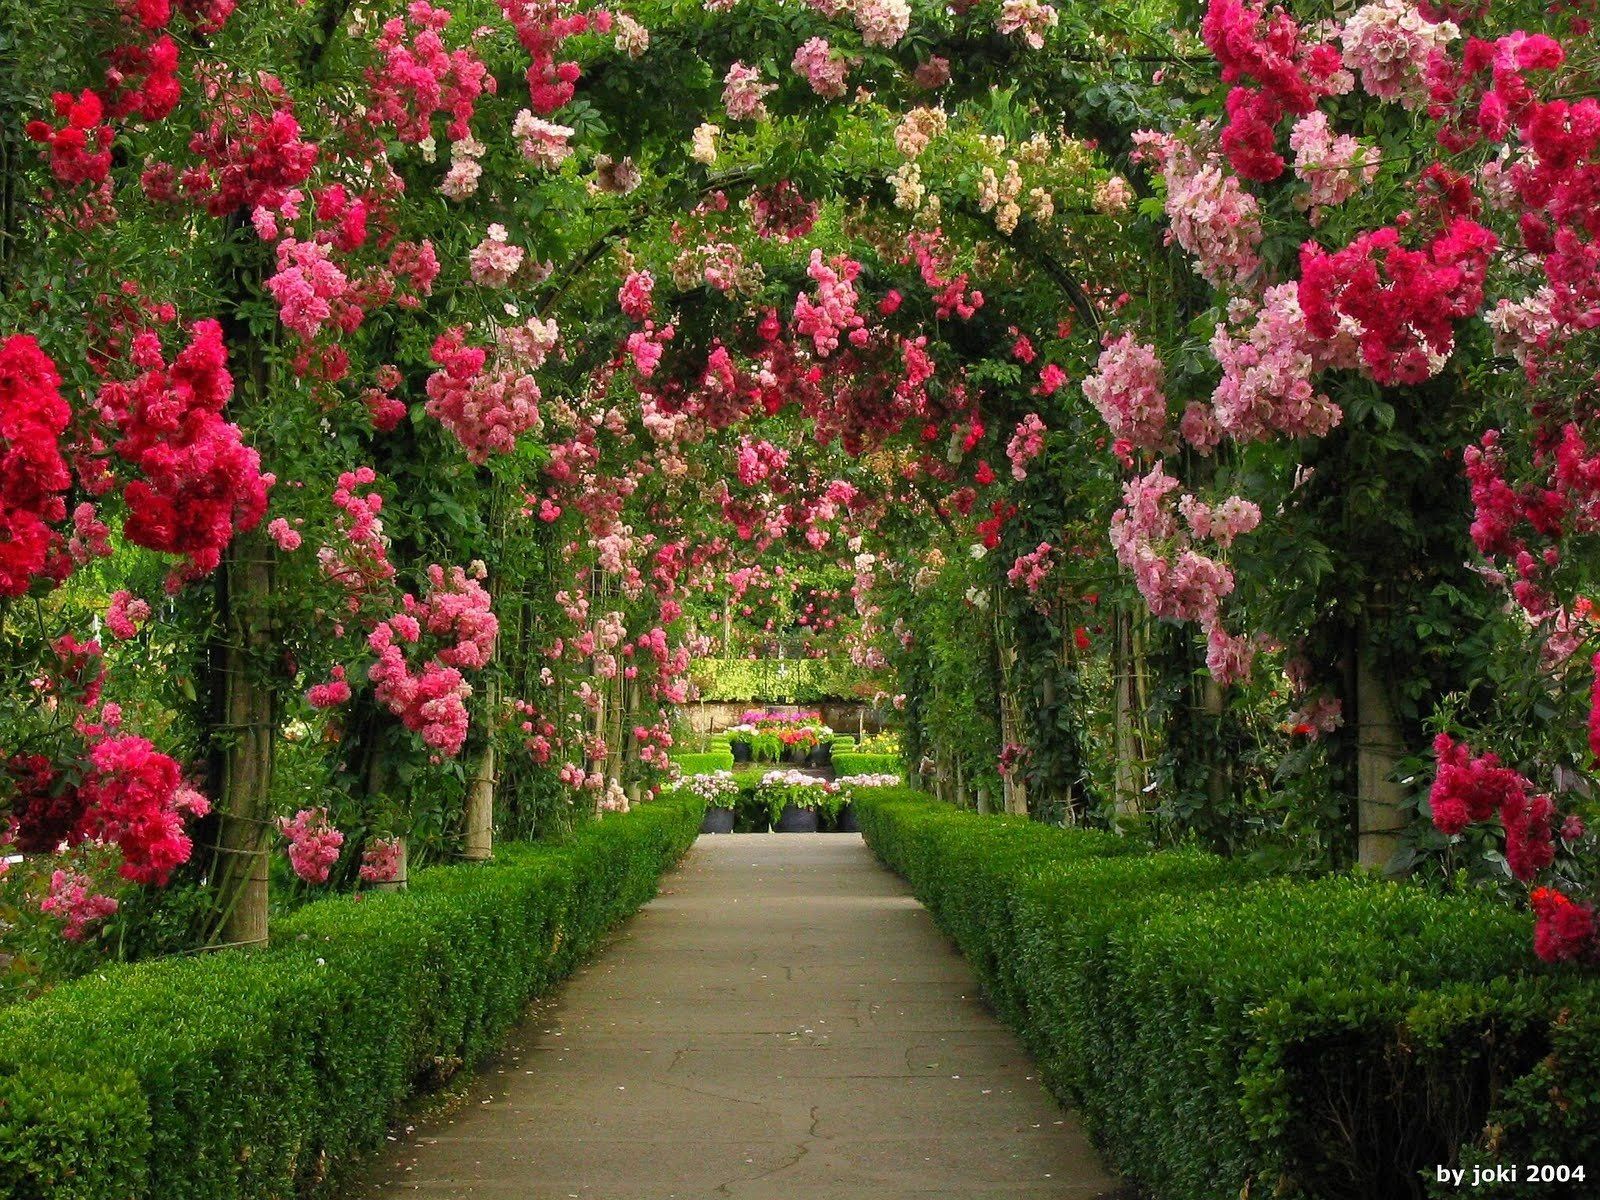 1600x1200 Arches in Rose Garden Wallpaper and Background Image. 